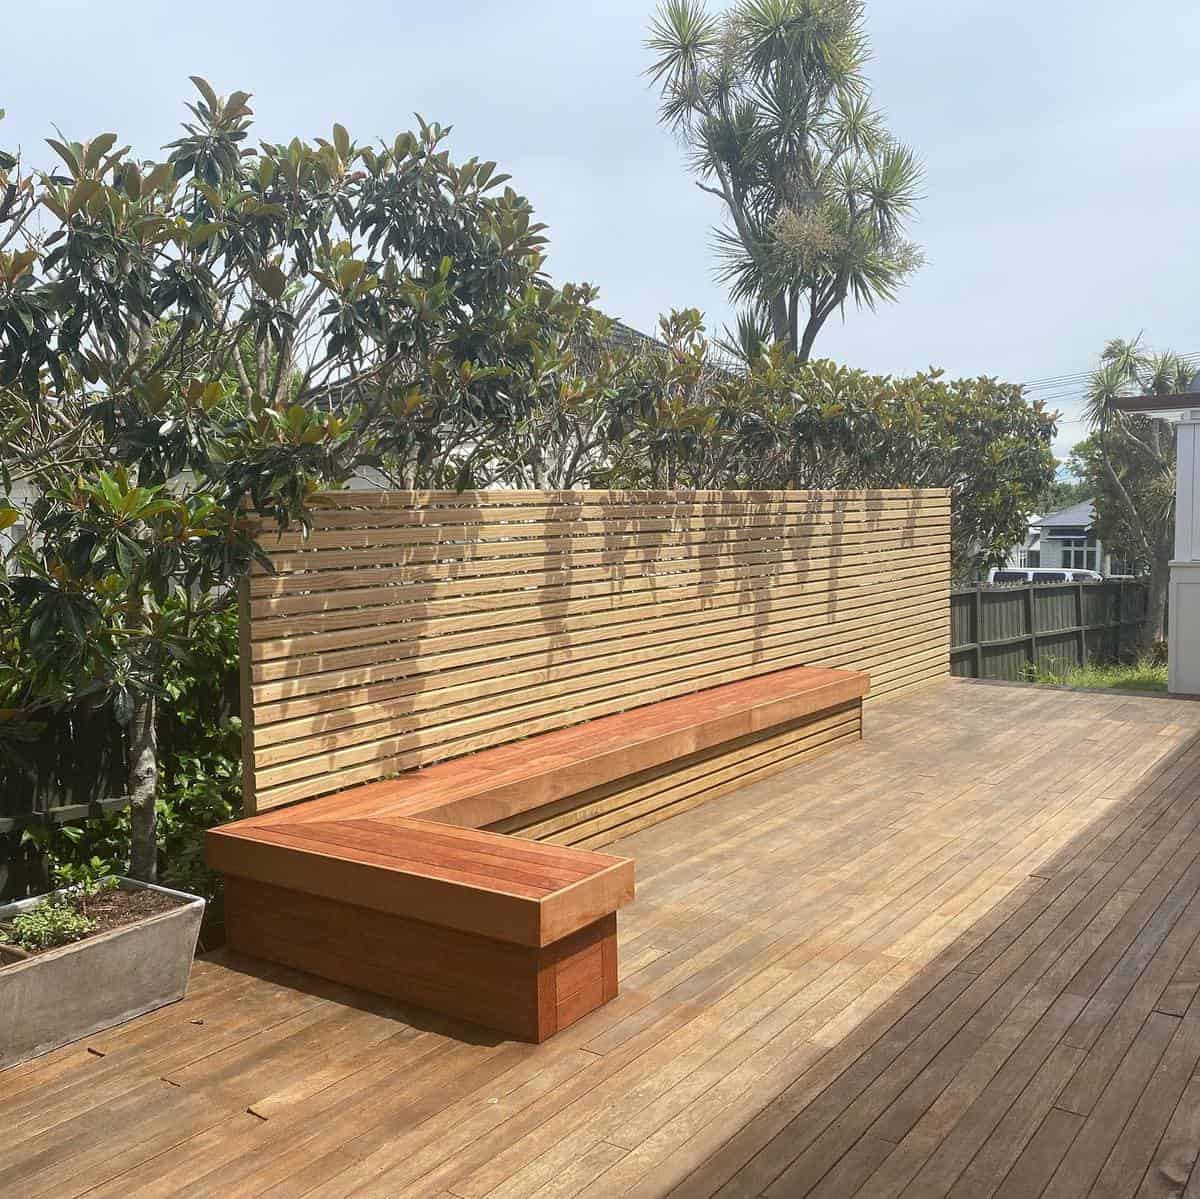 simple wooden deck and wooden seat